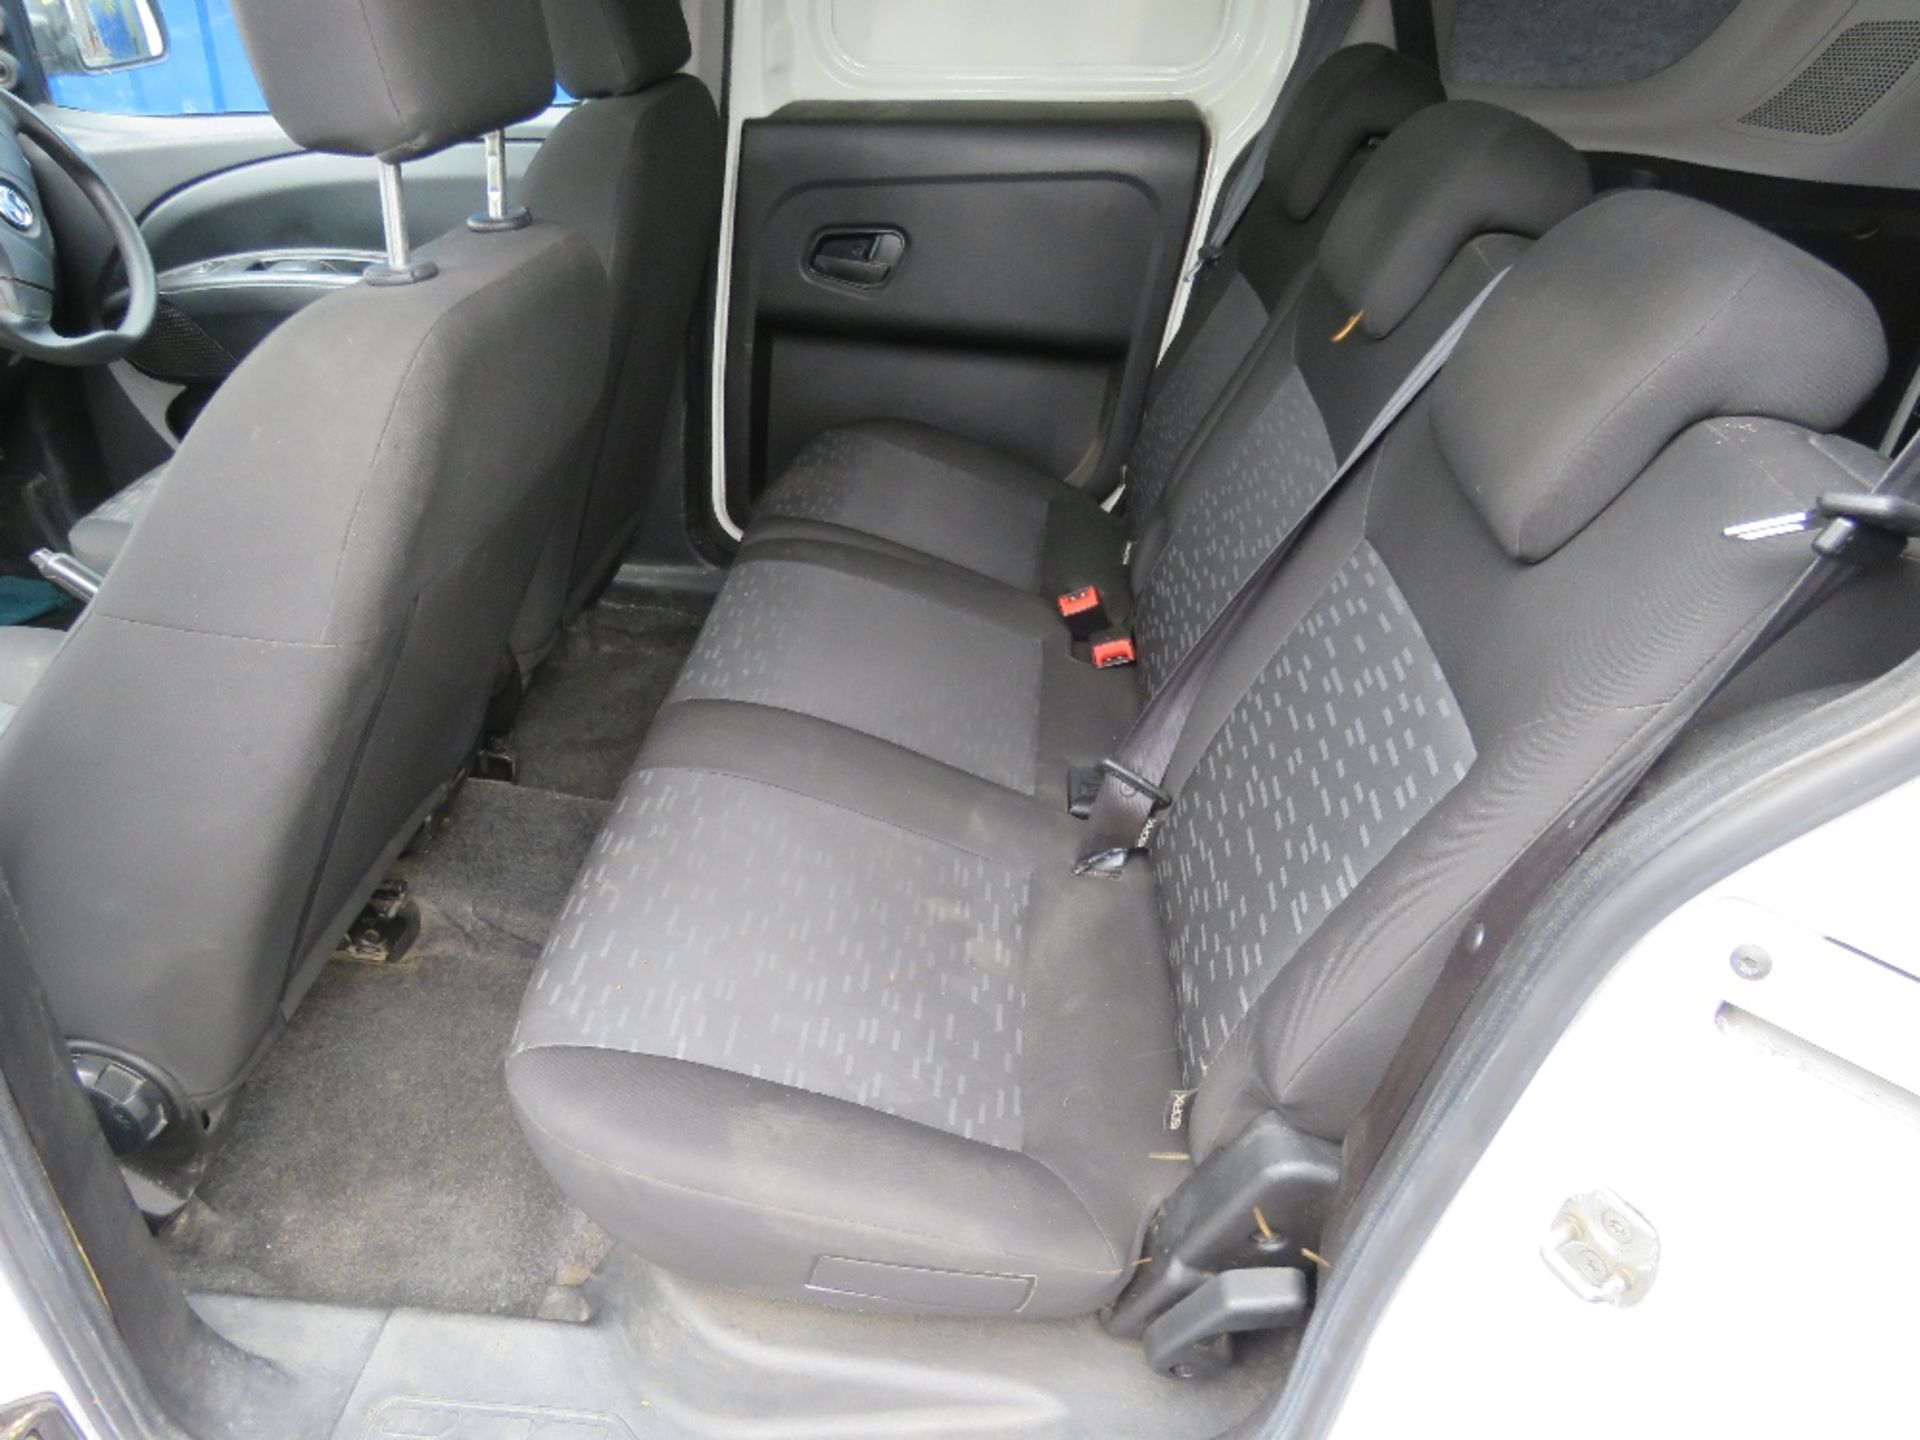 VAUXHALL COMBO 5 SEATER VAN REG: FL16 OPA. 93, 507 RECORDED MILES. WITH V5. TESTED UNTIL 2/3/24. OWN - Image 14 of 19